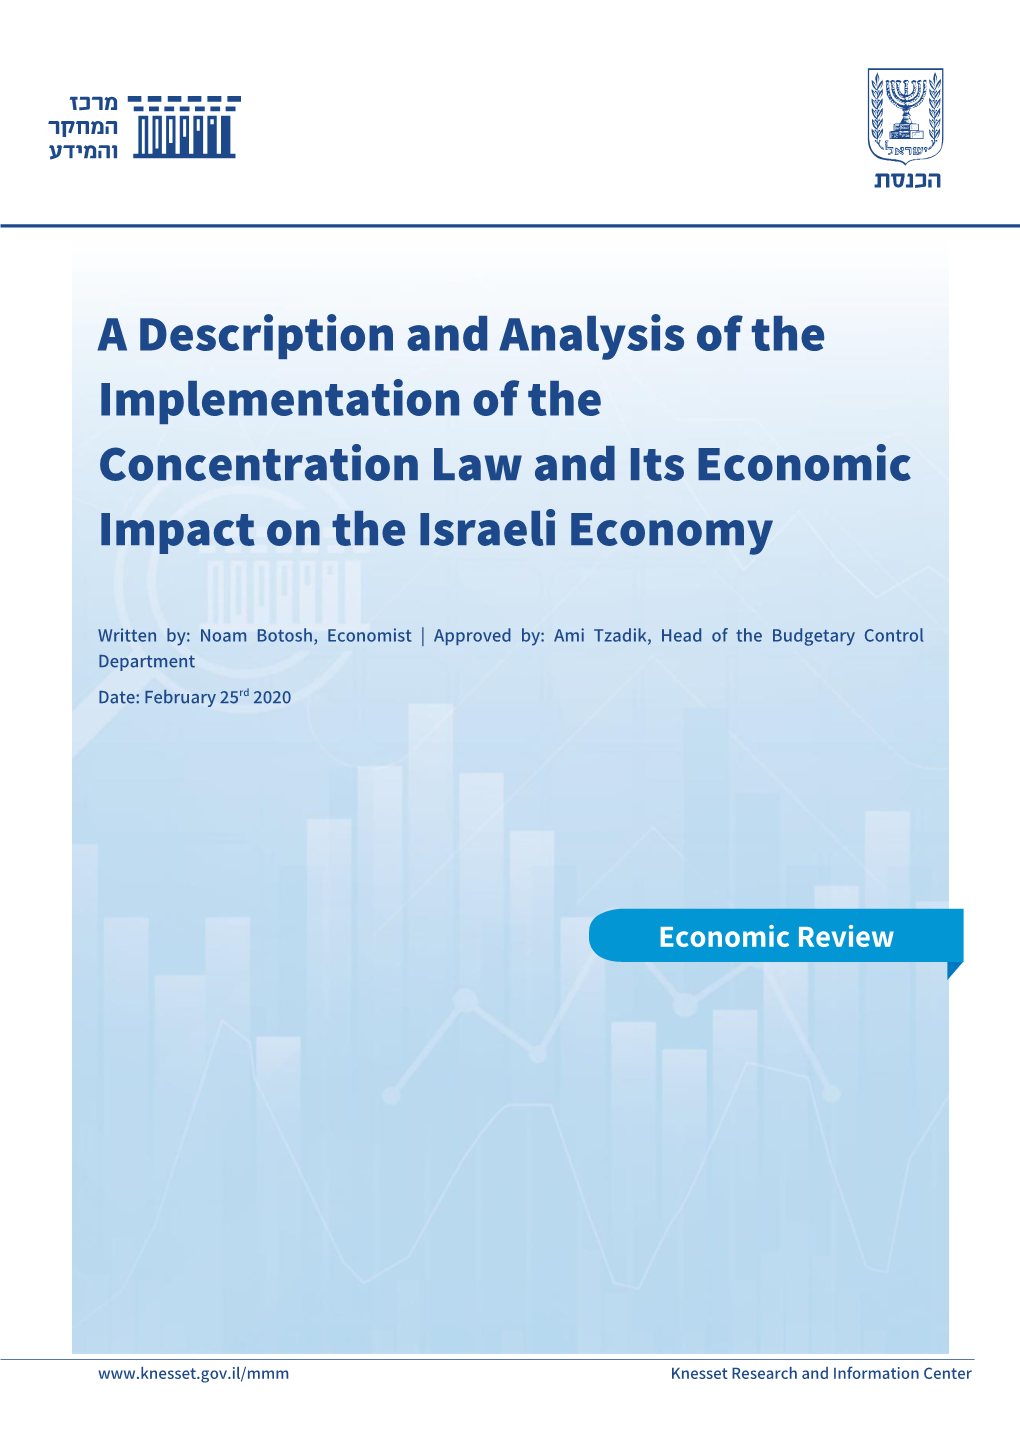 A Description and Analysis of the Implementation of the Concentration Law and Its Economic